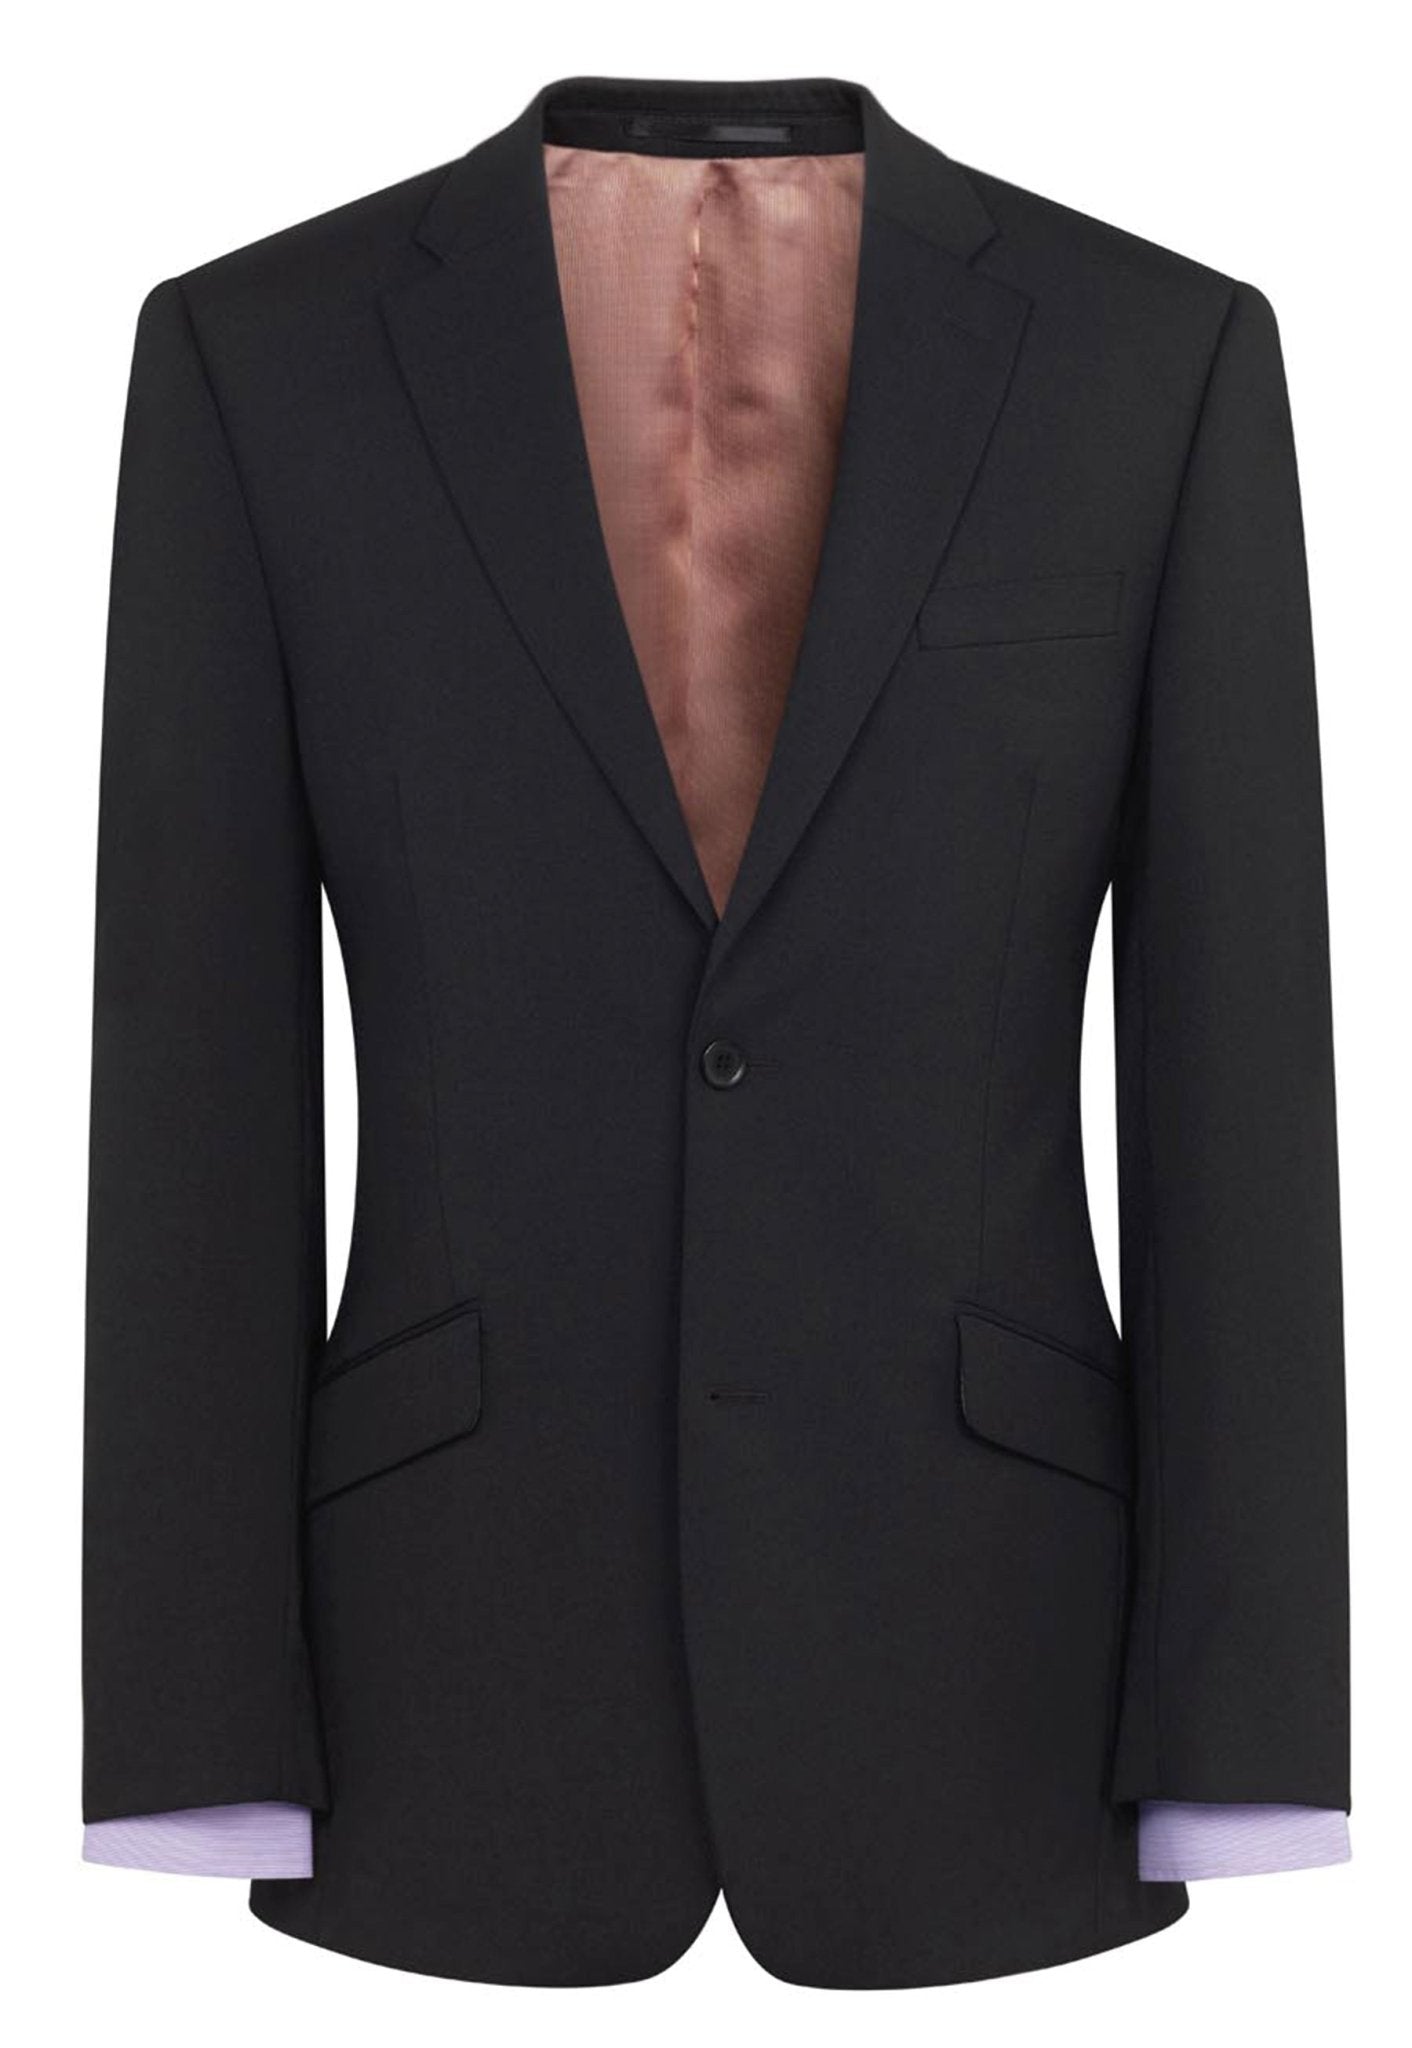 Brook Taverner Aldwych Tailored Fit Jacket - The Work Uniform Company